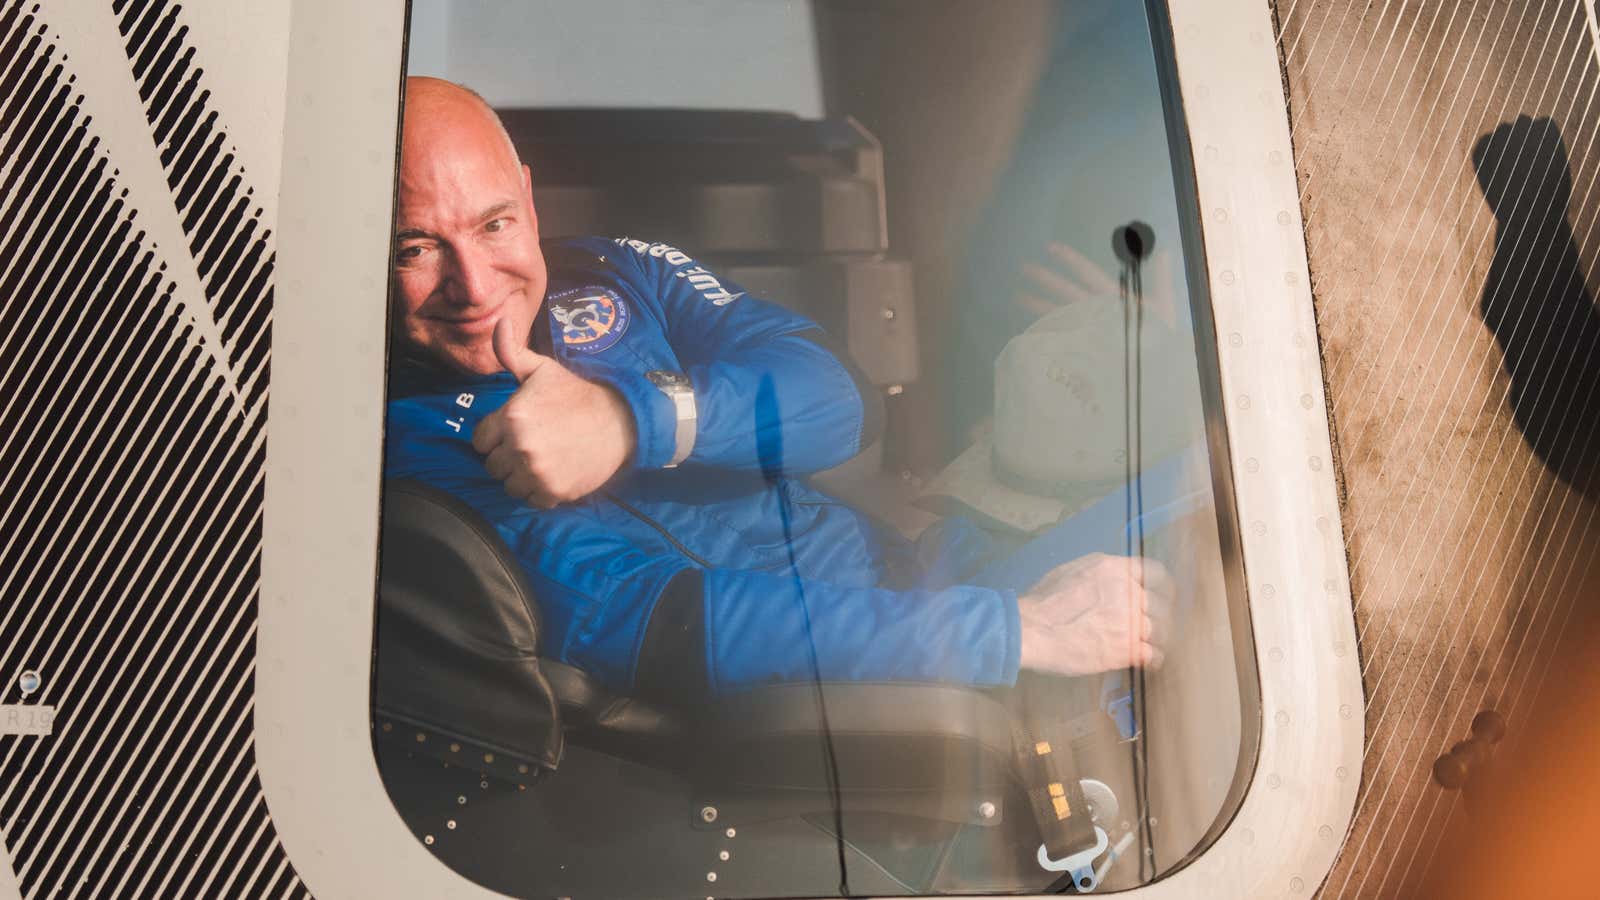 Jeff Bezos is seen inside the New Shepard capsule after returning from the edge of space.